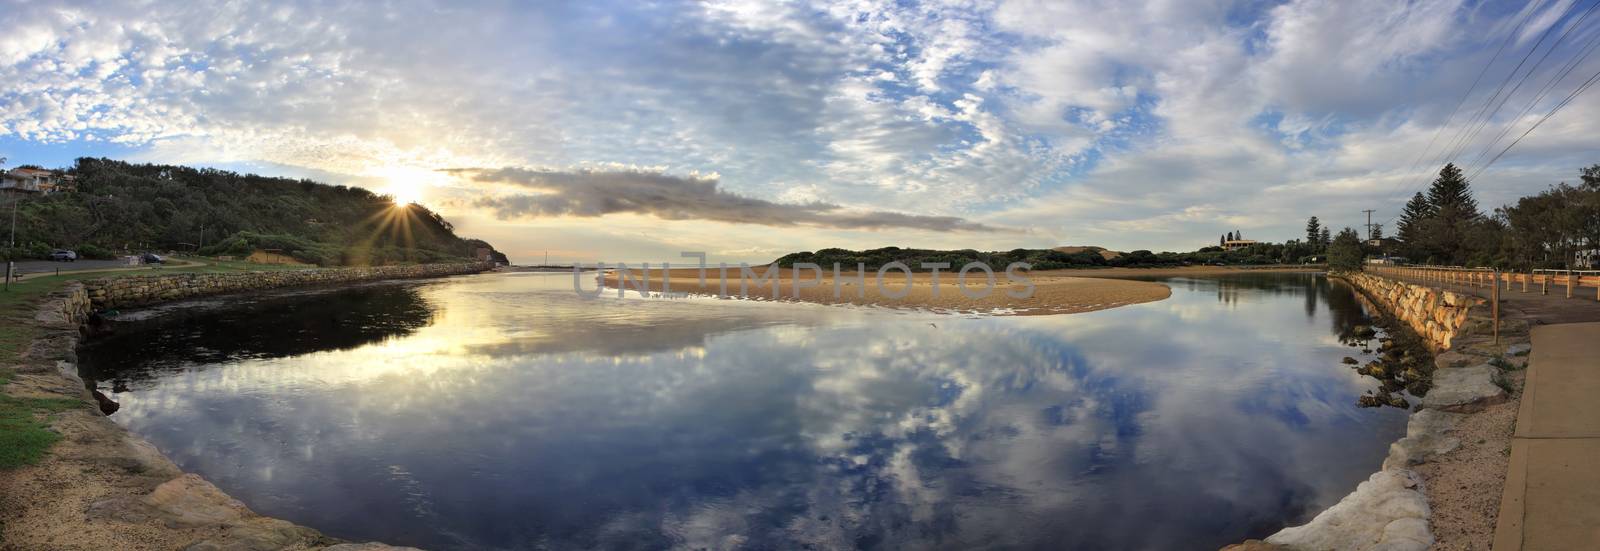 Narrabeen Lakes Entrance panorama early morning with sunburst over the North Narrabeen headland.  Narrabeen surf club at right.  The lake snakes around until it meets the ocean at North Narrabeen.  